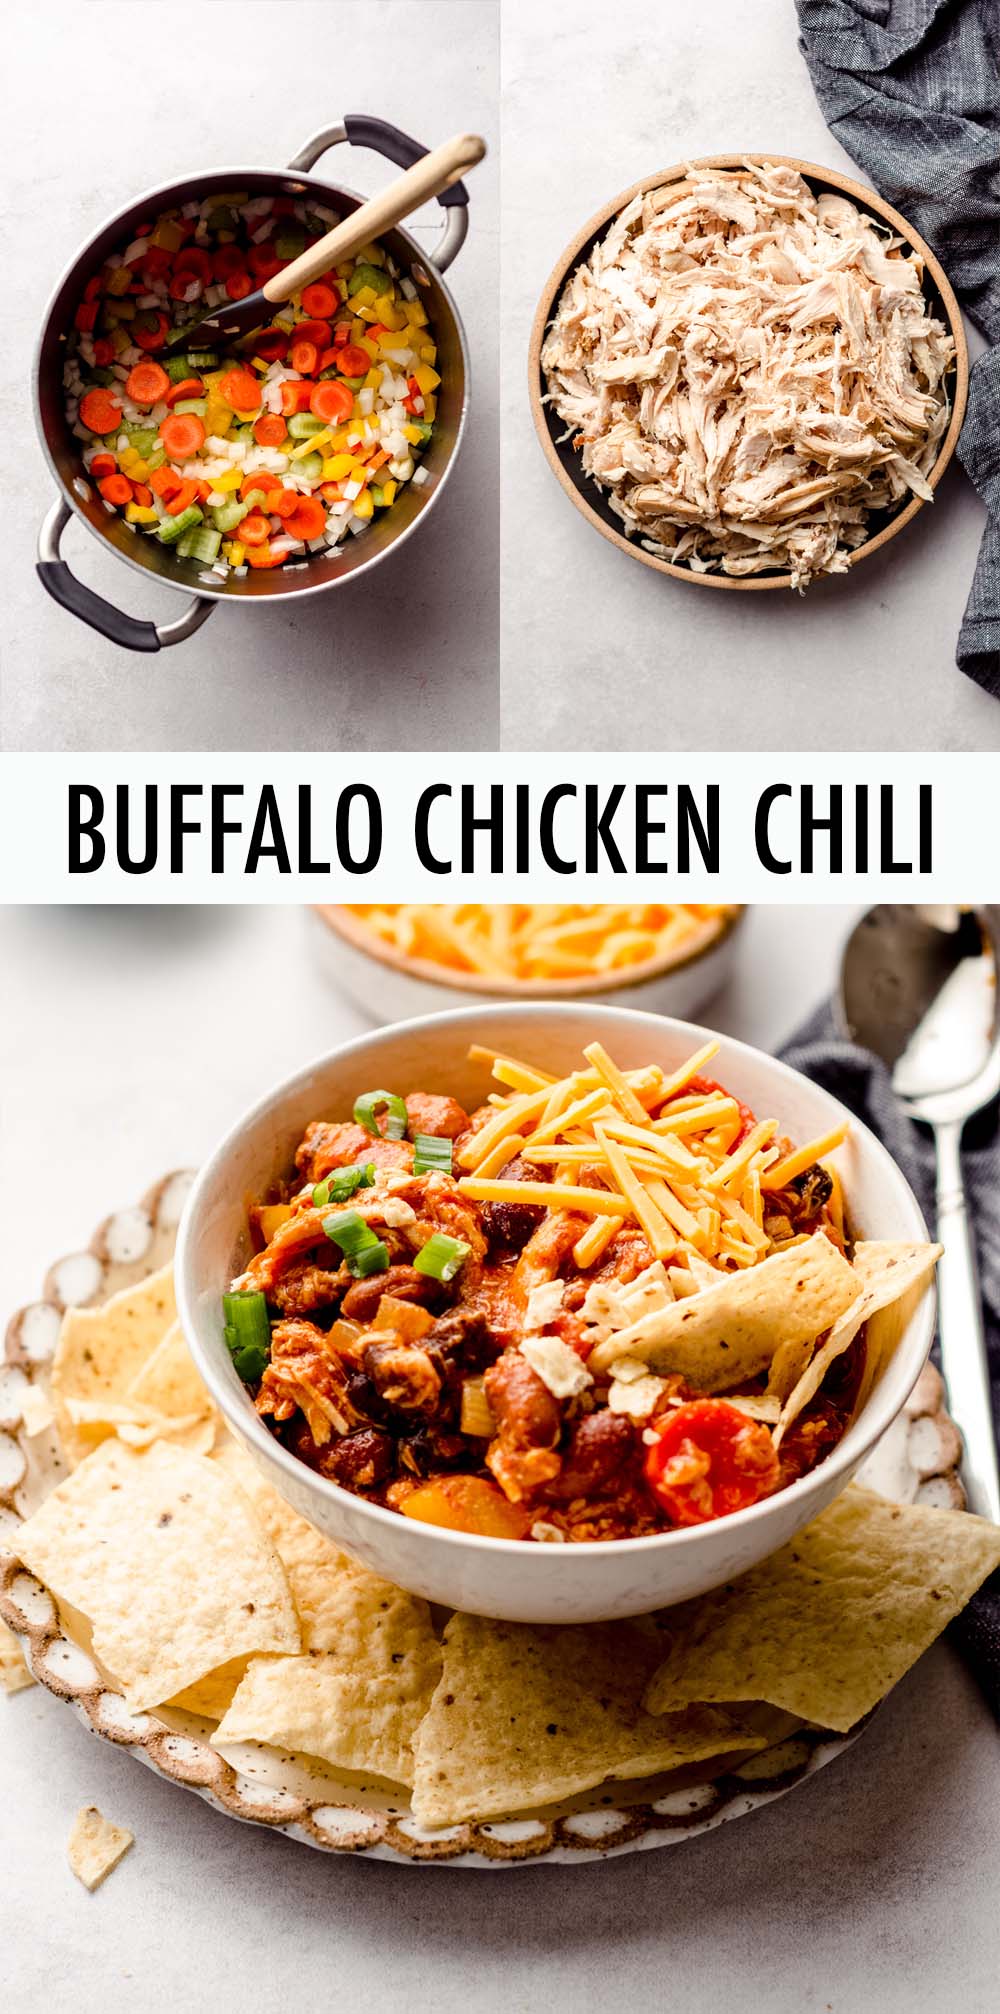 This award-winning buffalo chicken chili recipe uses a zesty blend of Mexican spices, shredded chicken, lots of vegetables, and a hefty dose of hot sauce to create a non-traditional chili perfect for cold weather cooking. via @frshaprilflours